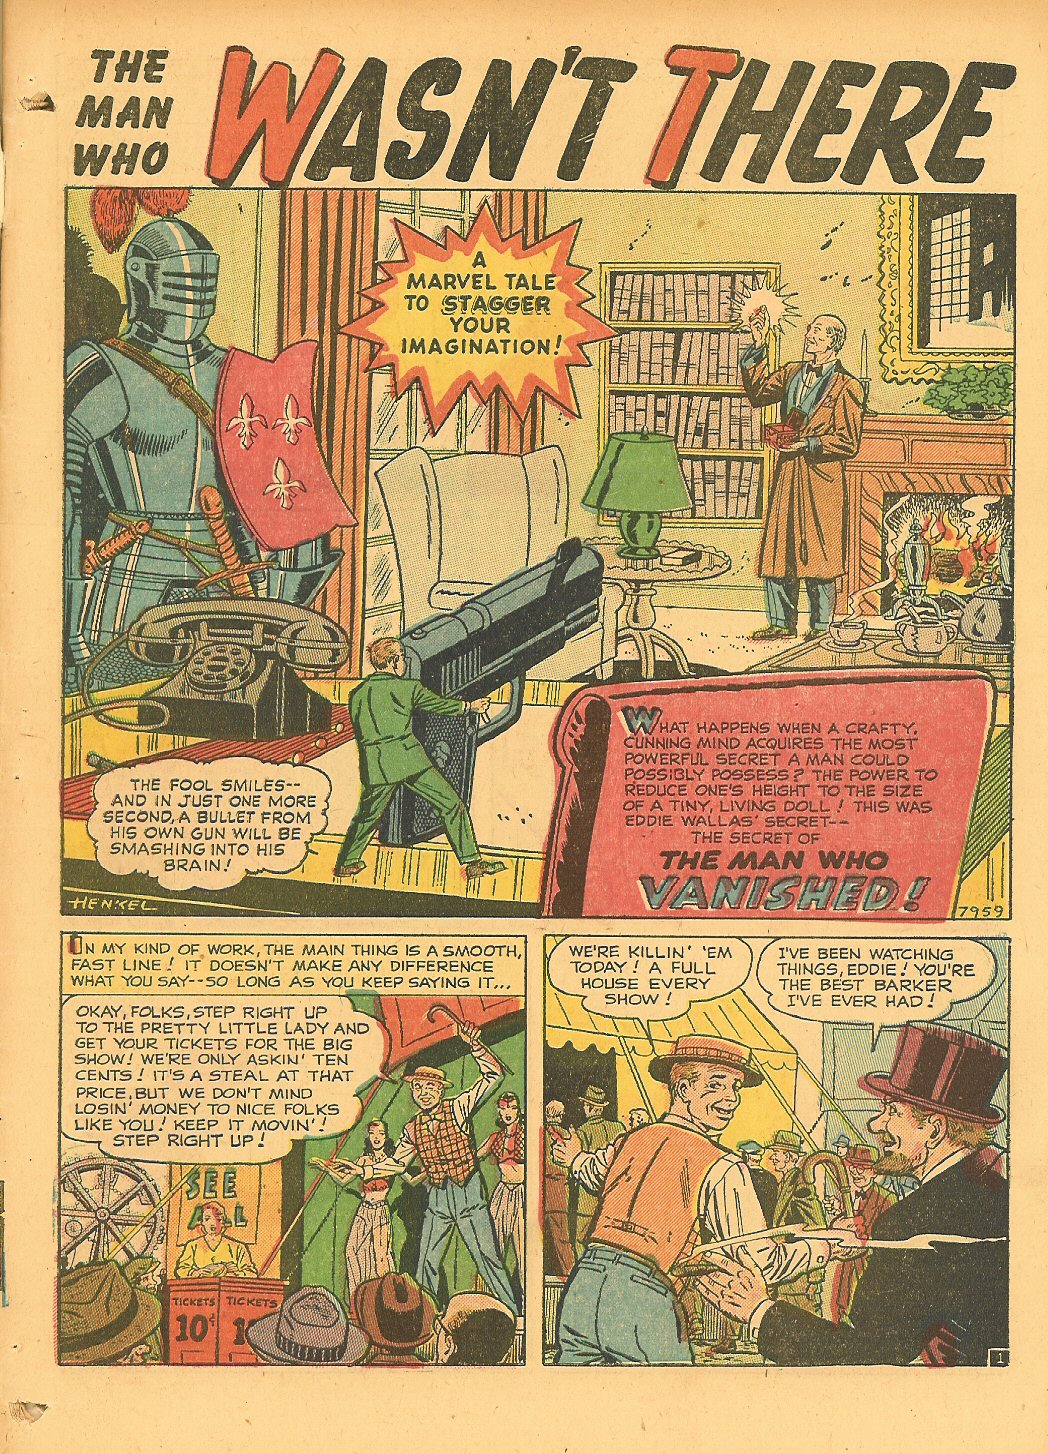 Marvel Tales (1949) 100 Page 1